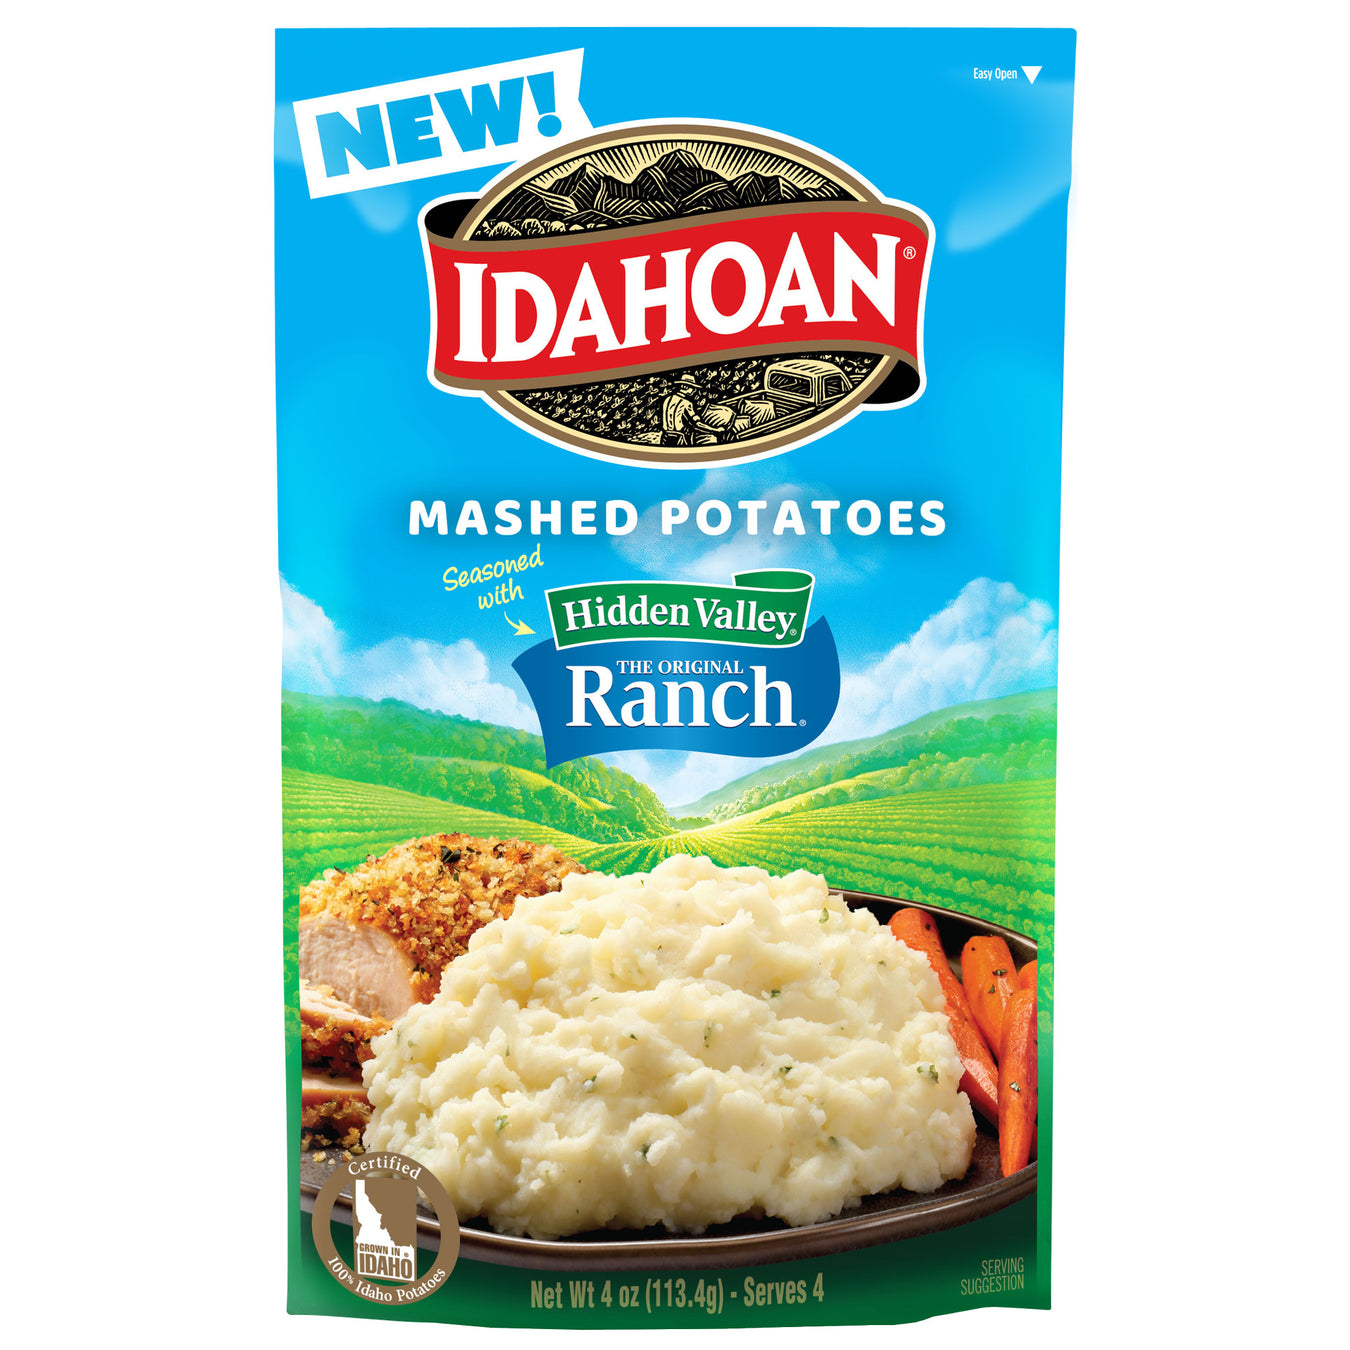 Flavored Mashed